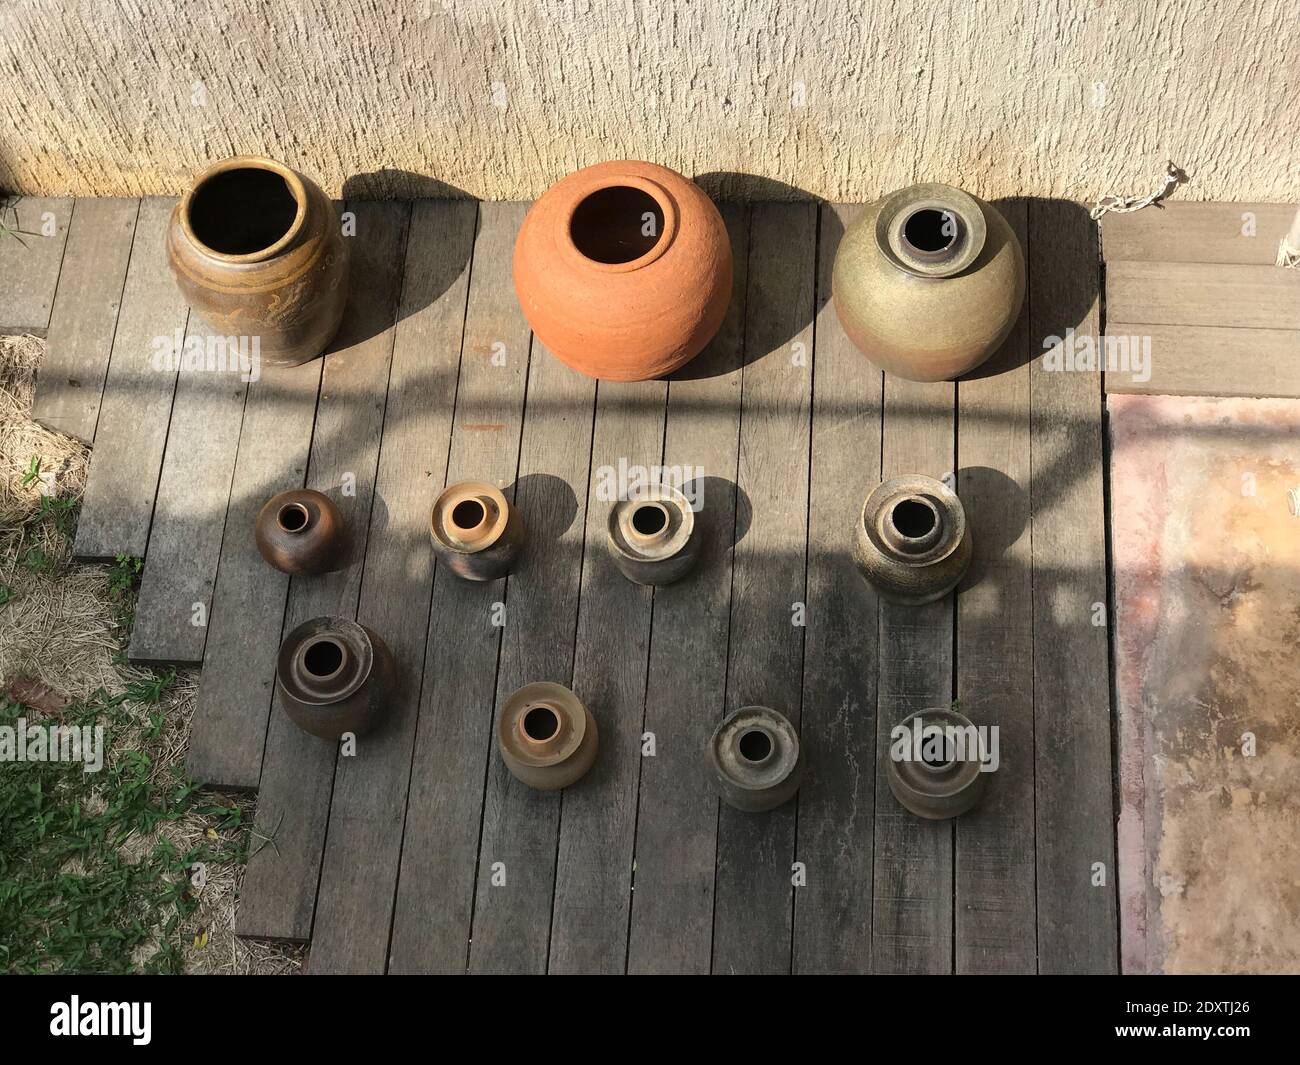 High Angle View Of Earthen Pots On Wooden Planks Stock Photo